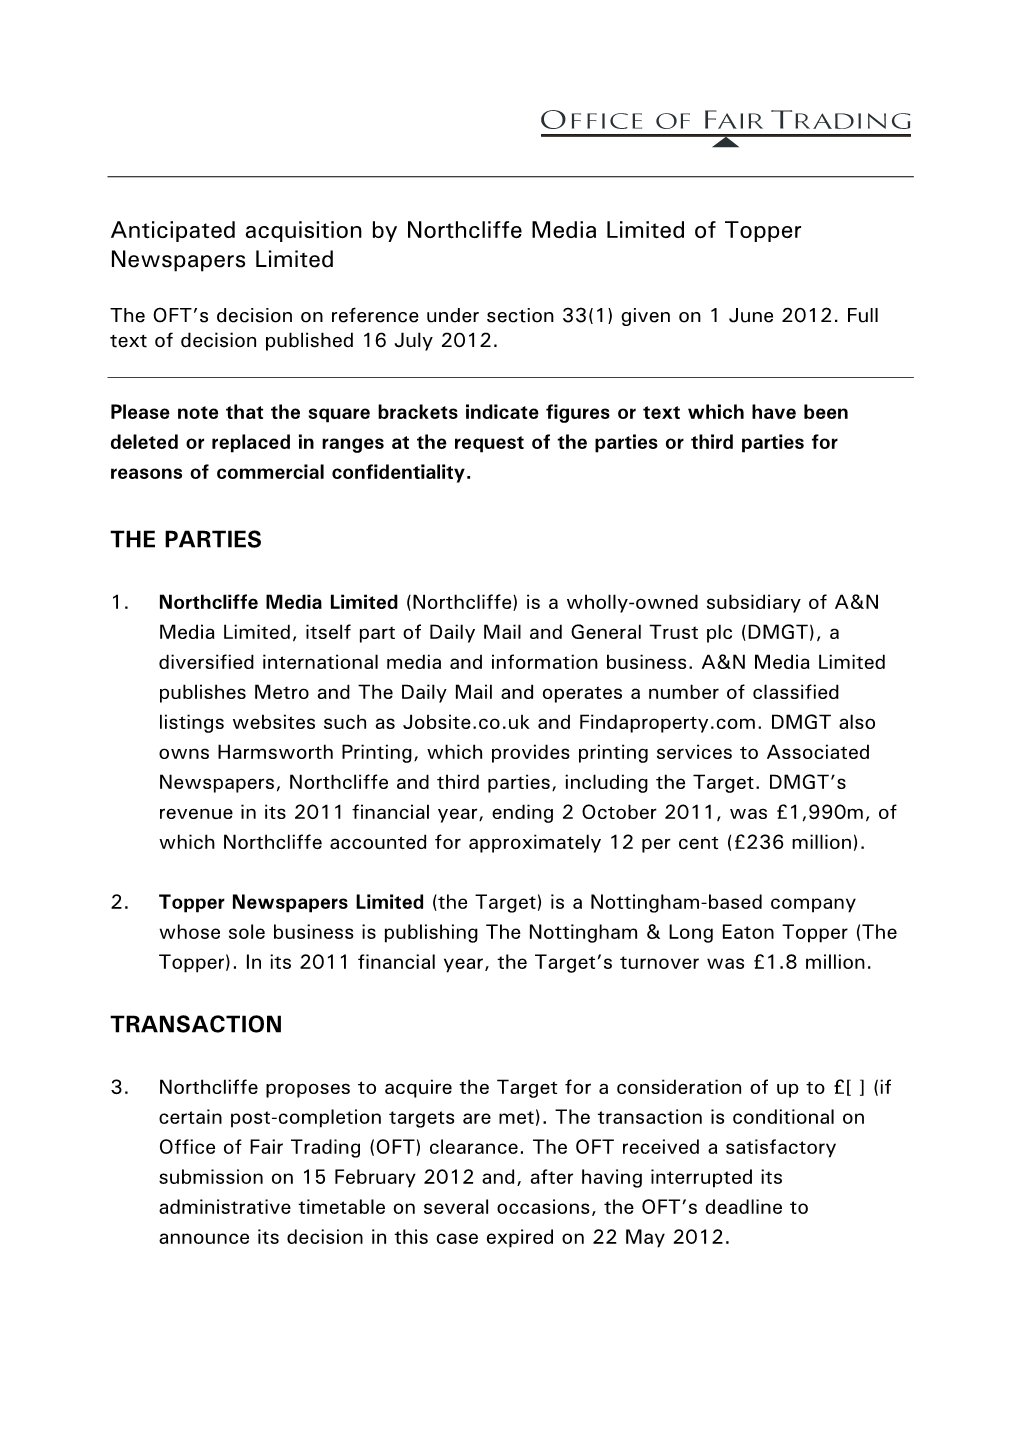 Full Text of the Decision Regarding the Anticipated Acquisition by Northcliffe Media Limited of Topper Newspapers Limited